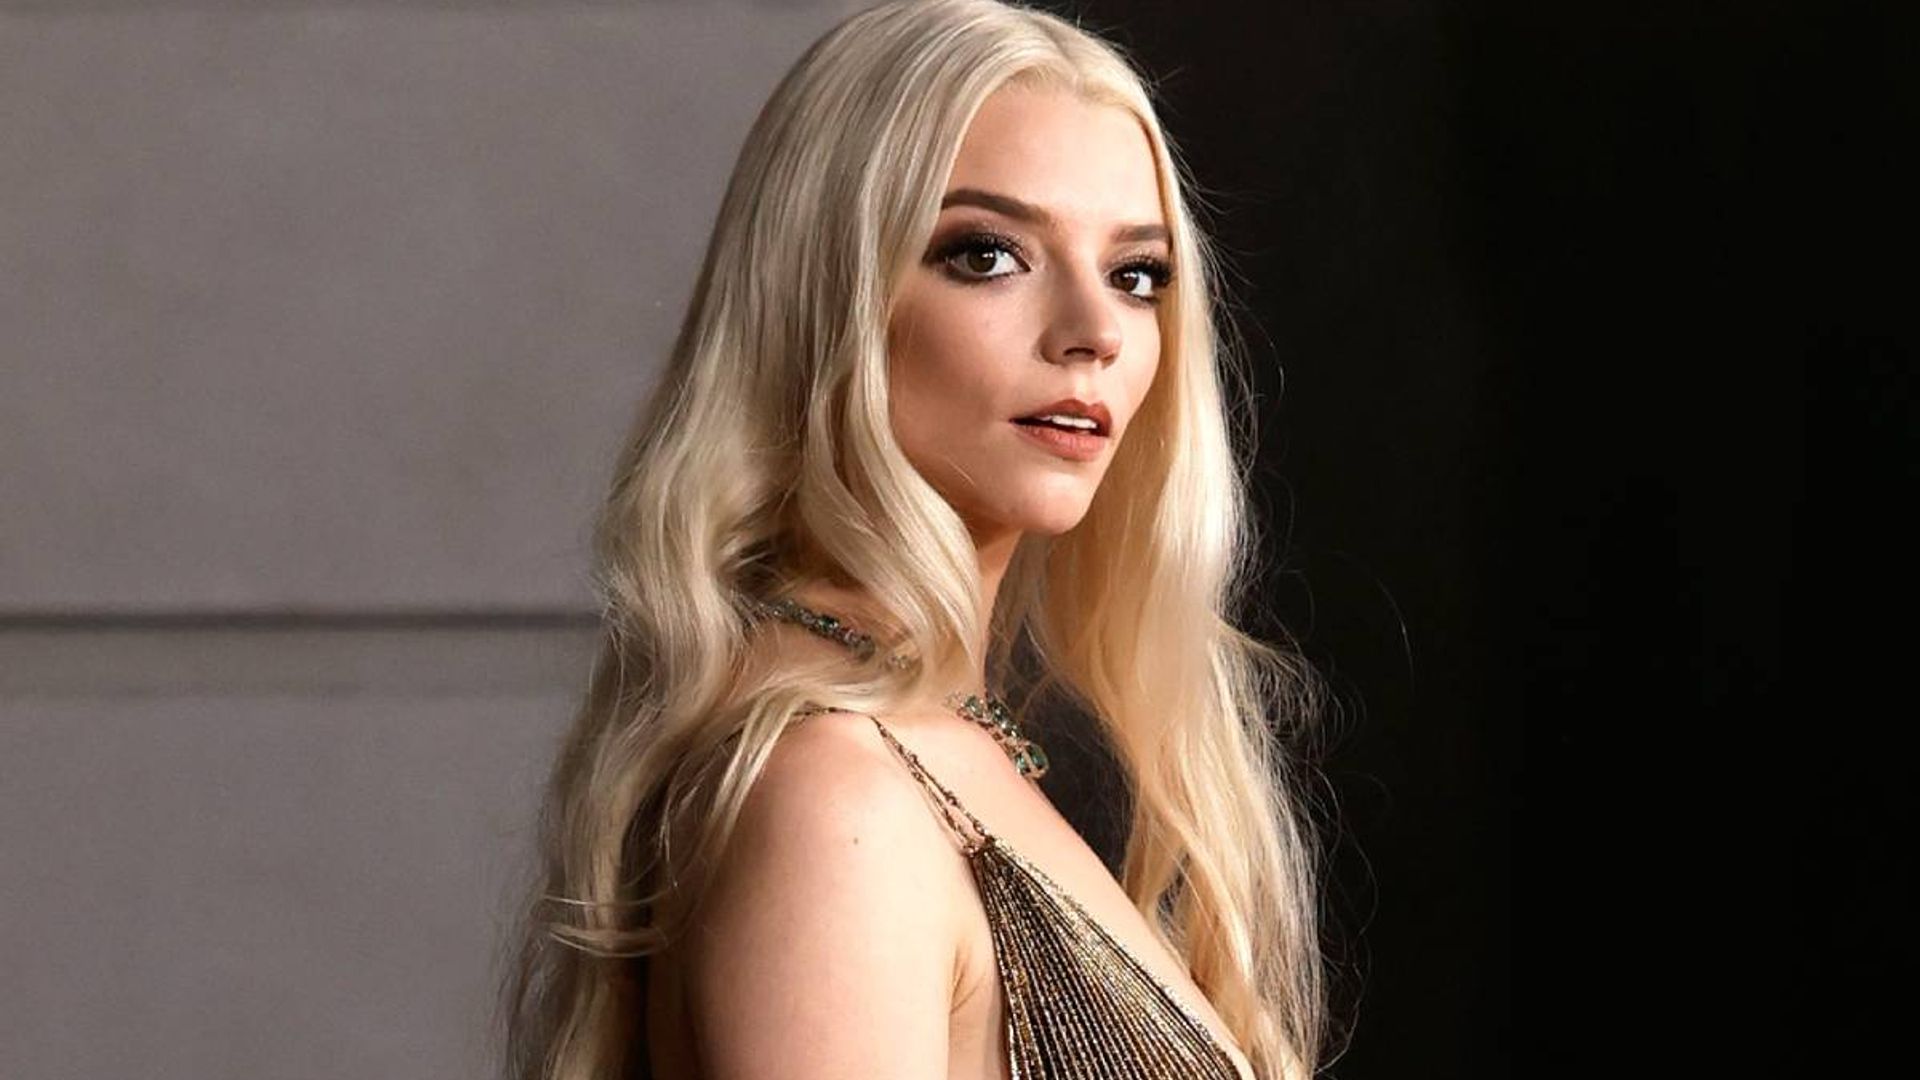 Anya Taylor-Joy looks chic as ever at the premiere of her star-studded new film The Northman